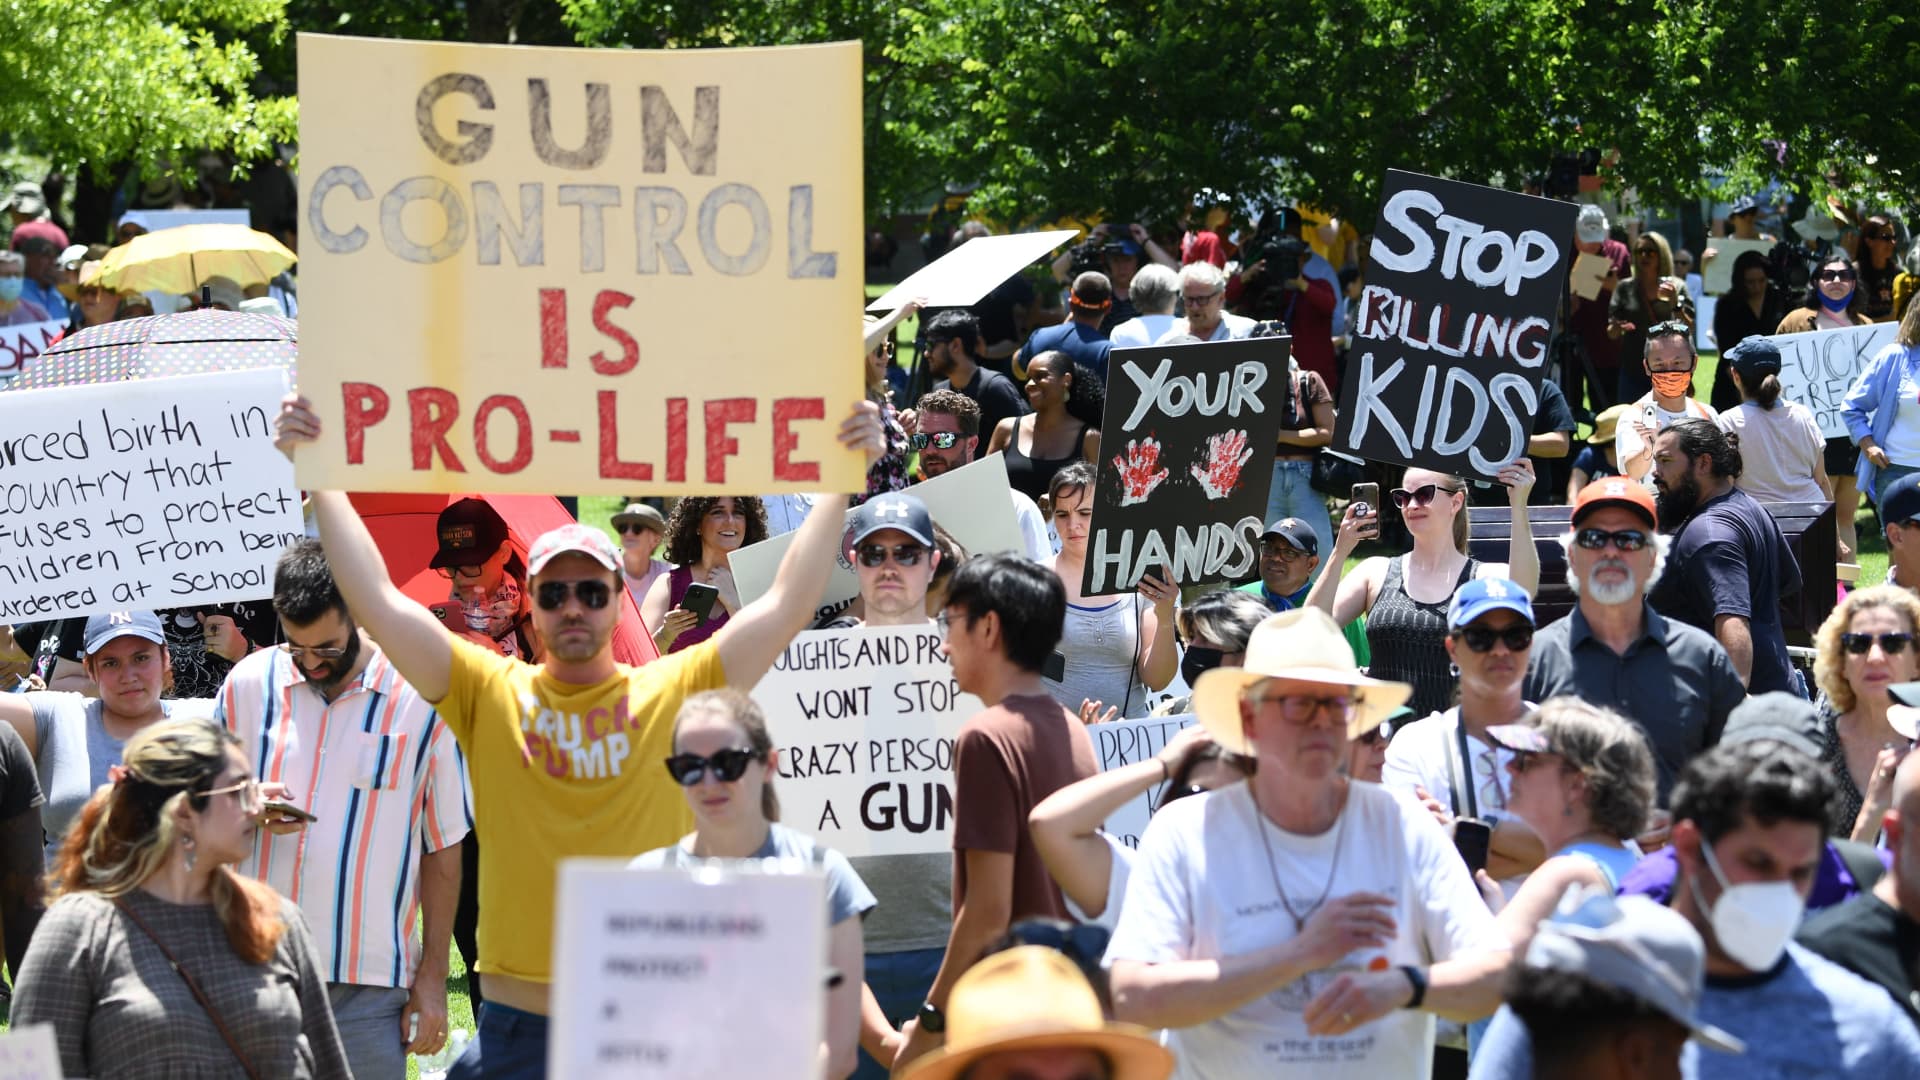 Gun rights activists and supporters protest outside the National Rifle Association Annual Meeting at the George R. Brown Convention Center, on May 27, 2022, in Houston, Texas.